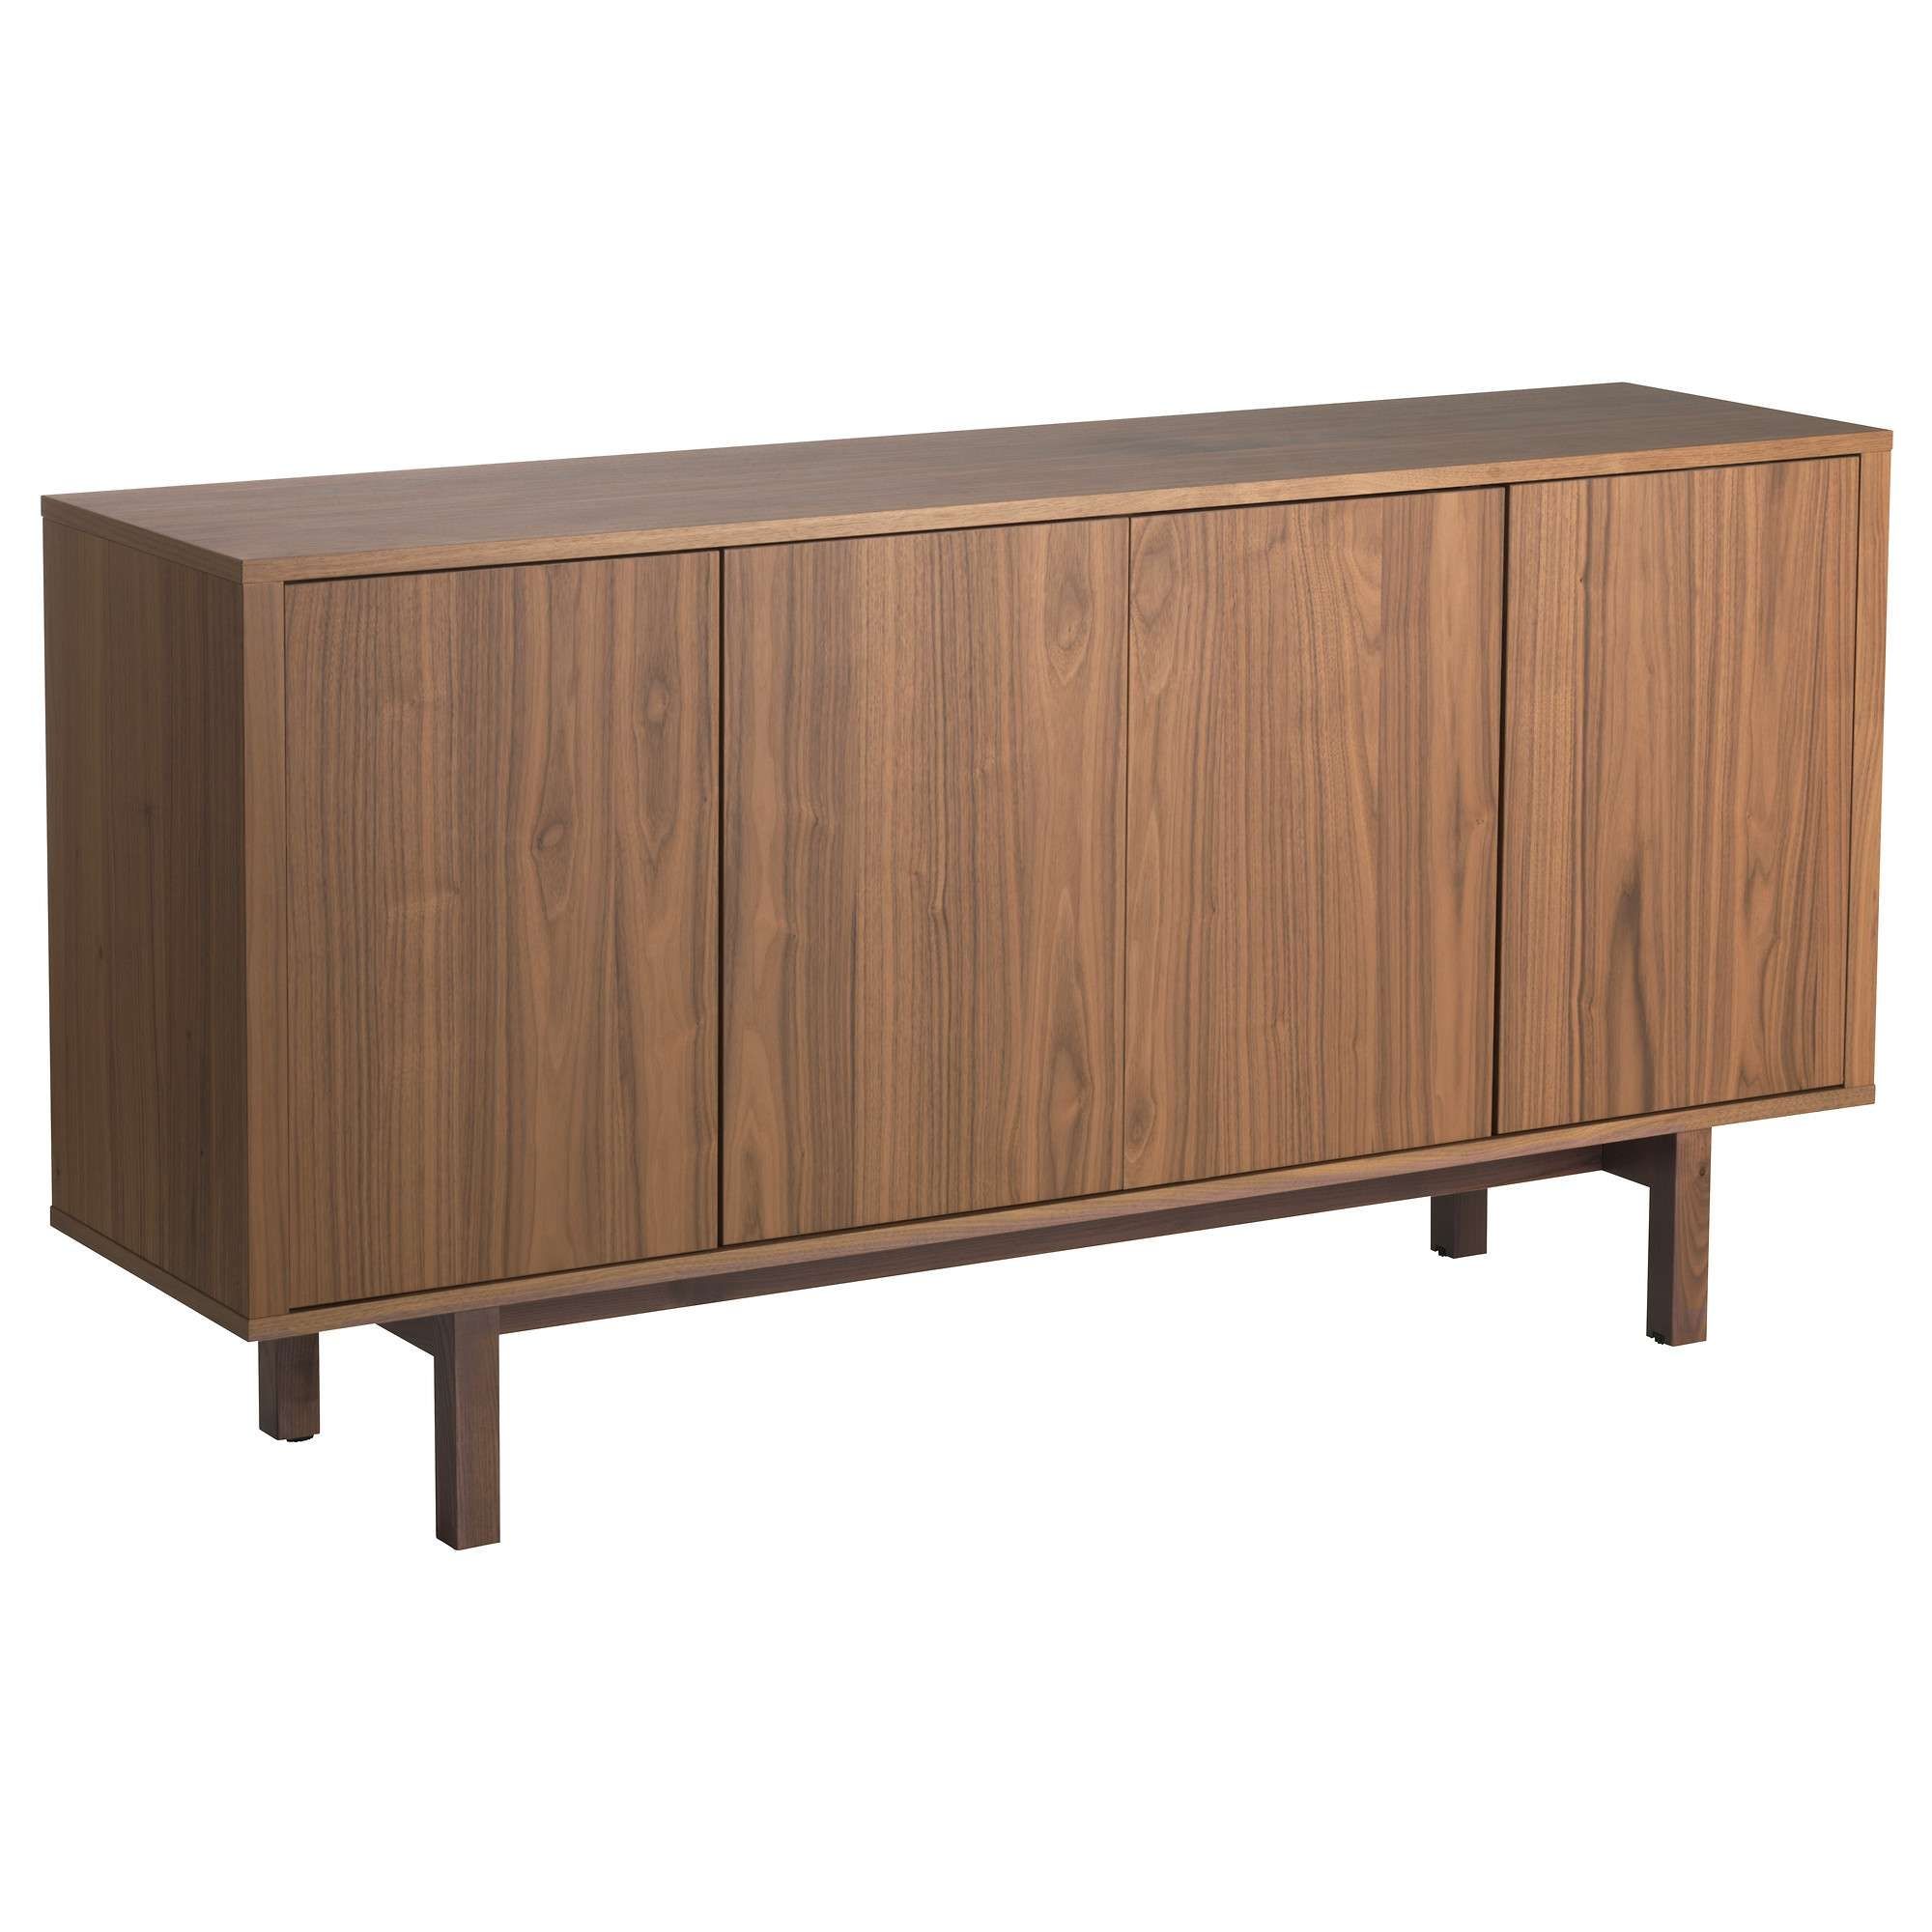 Buffet Tables & Sideboards – Ikea For 48 Inch Sideboards (View 12 of 20)